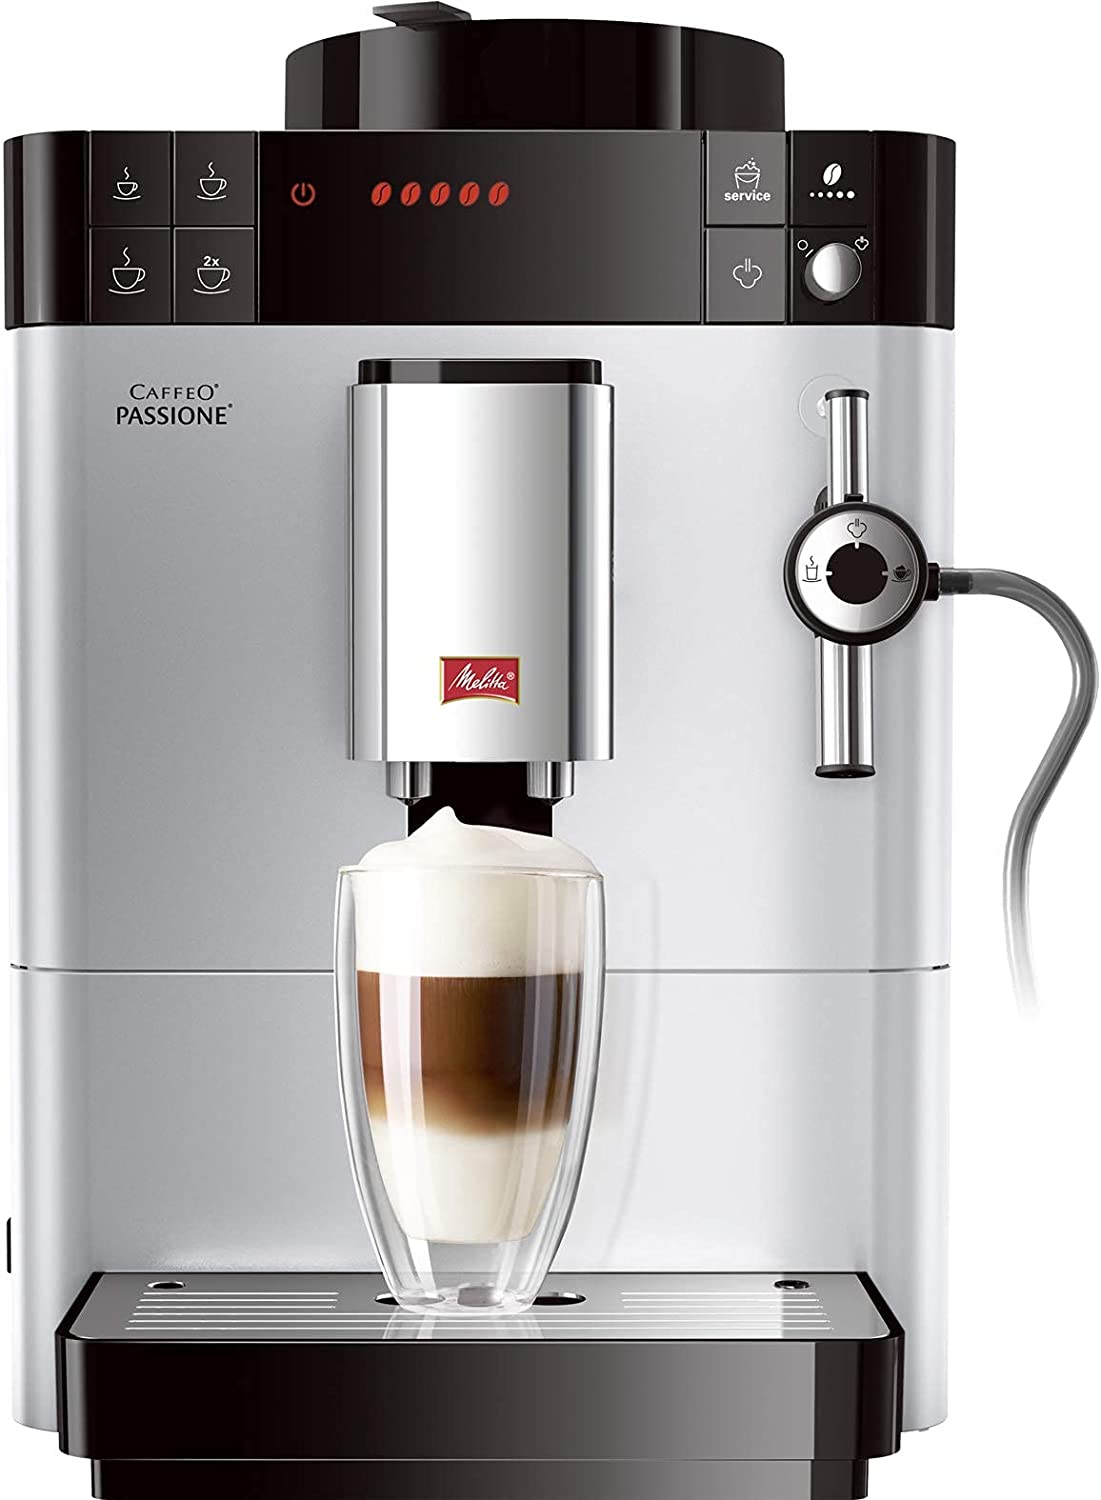 Melitta Passione F530-101 Automatic Coffee Machine with Grinder, Coffee Beans, Milk System, Automatic Cleaning, Customisable, 15 Bar, Silver (Refurbished)